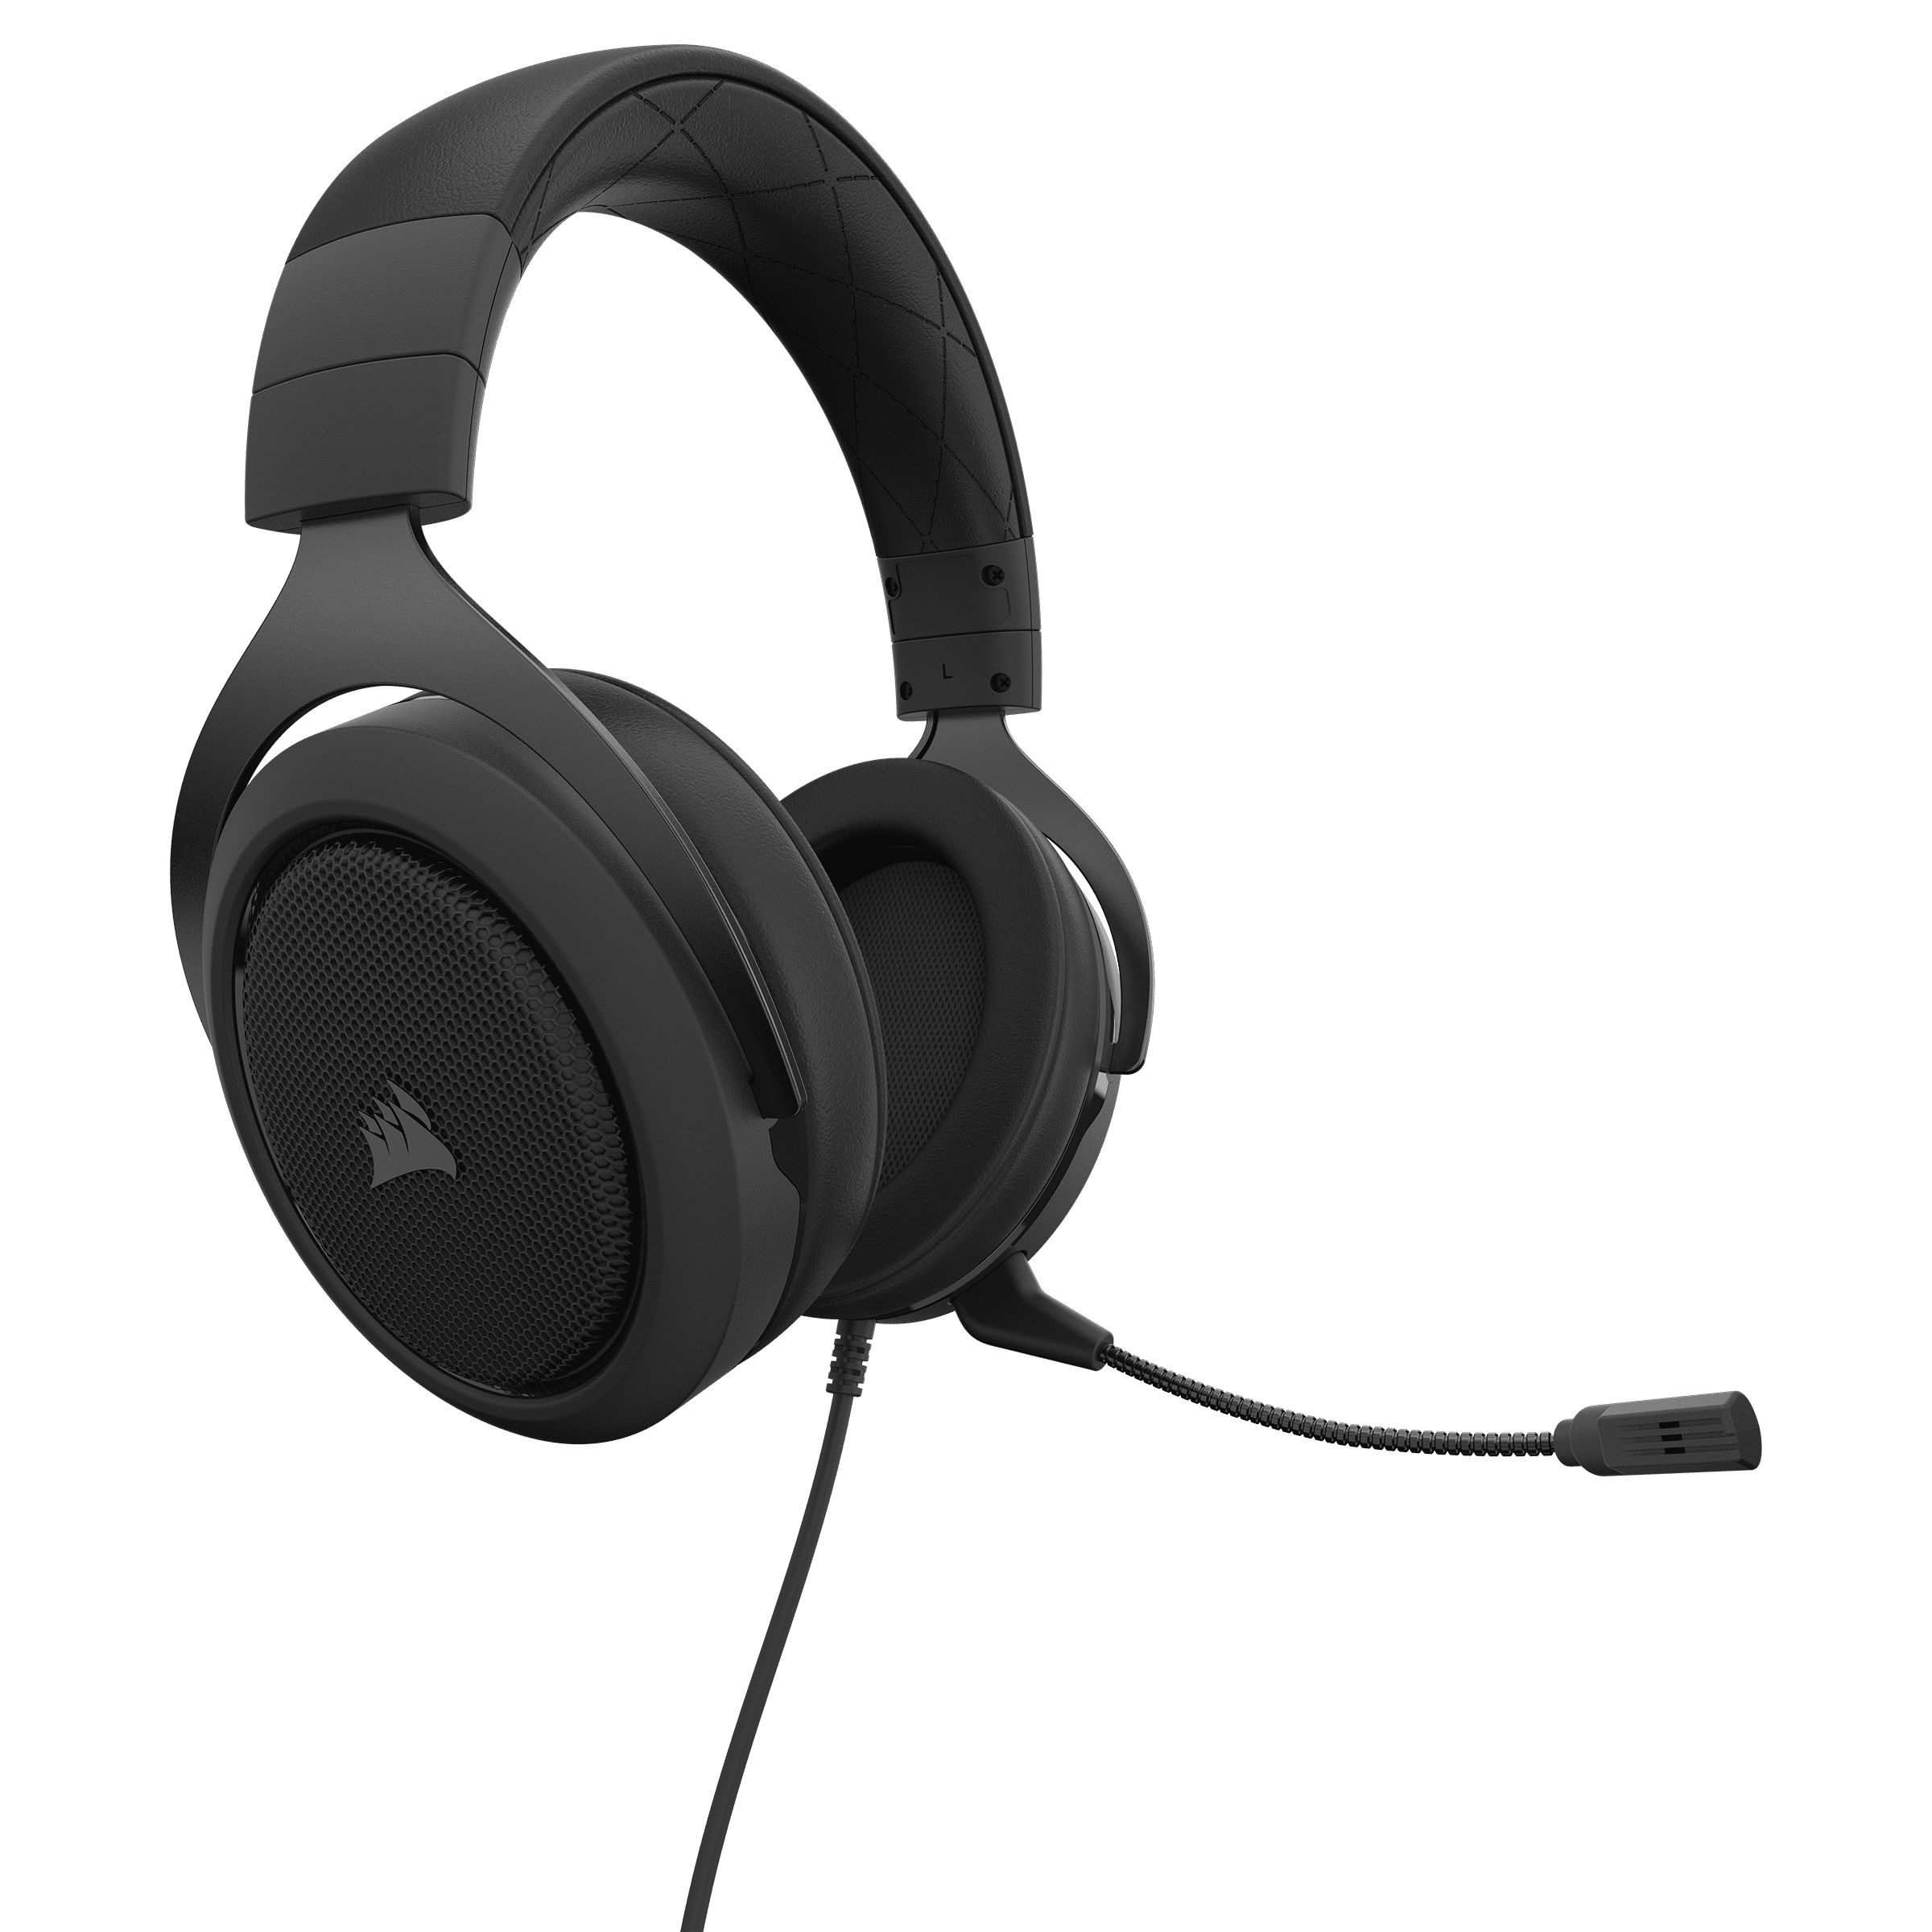 Platteland Faculteit Industrialiseren Corsair HS50 Pro Stereo Gaming Headset - Discord Certified Headphones -  Works with PC, Mac, Xbox Series X, Xbox Series S, Xbox One, PS5, PS4,  Nintendo Switch, iOS and Android - Carbon - Walmart.com